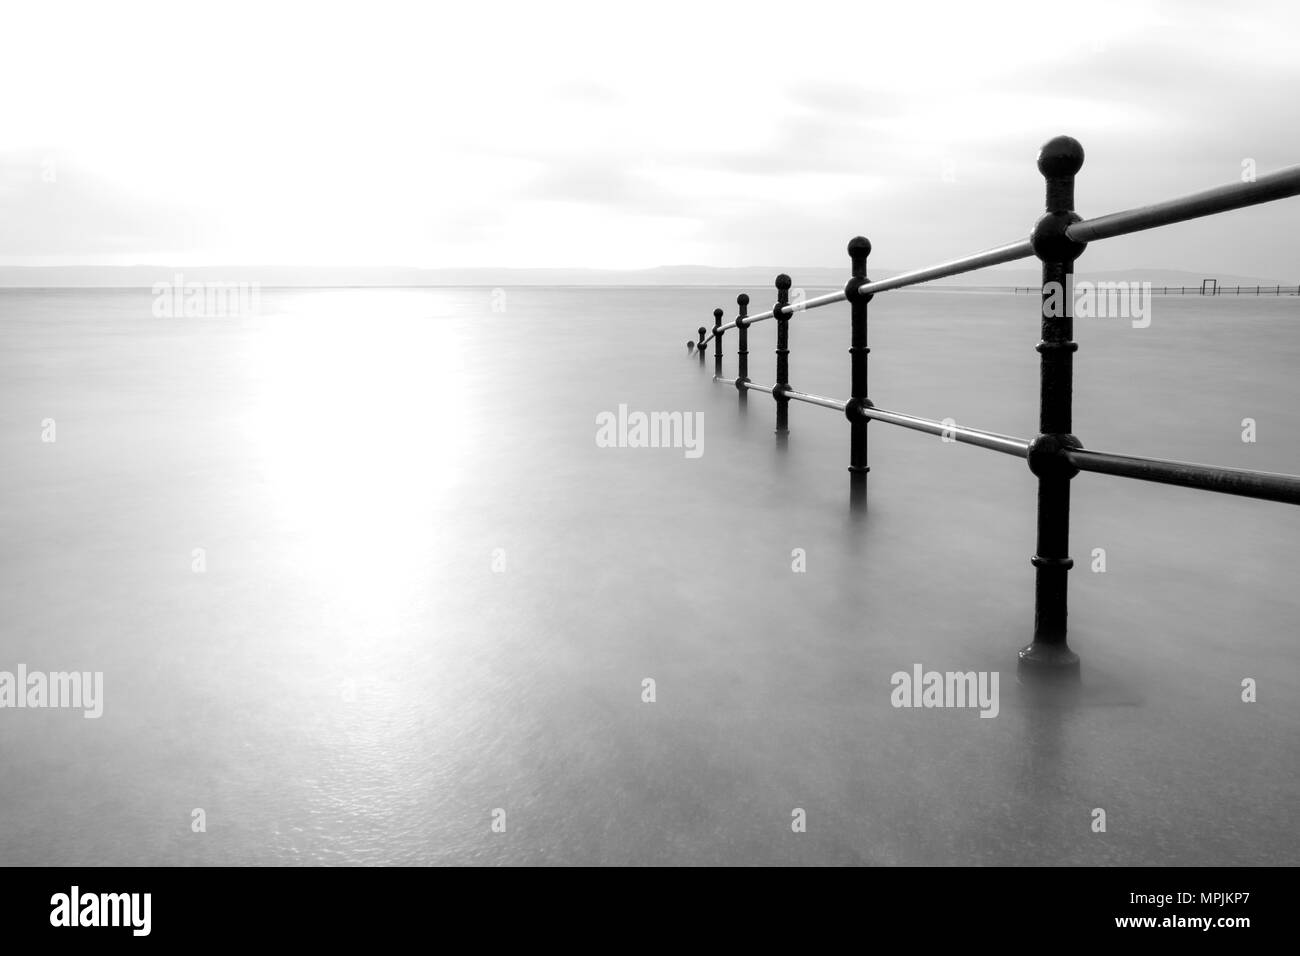 Railings disappearing into the sea. Long exposure black and white. Stock Photo